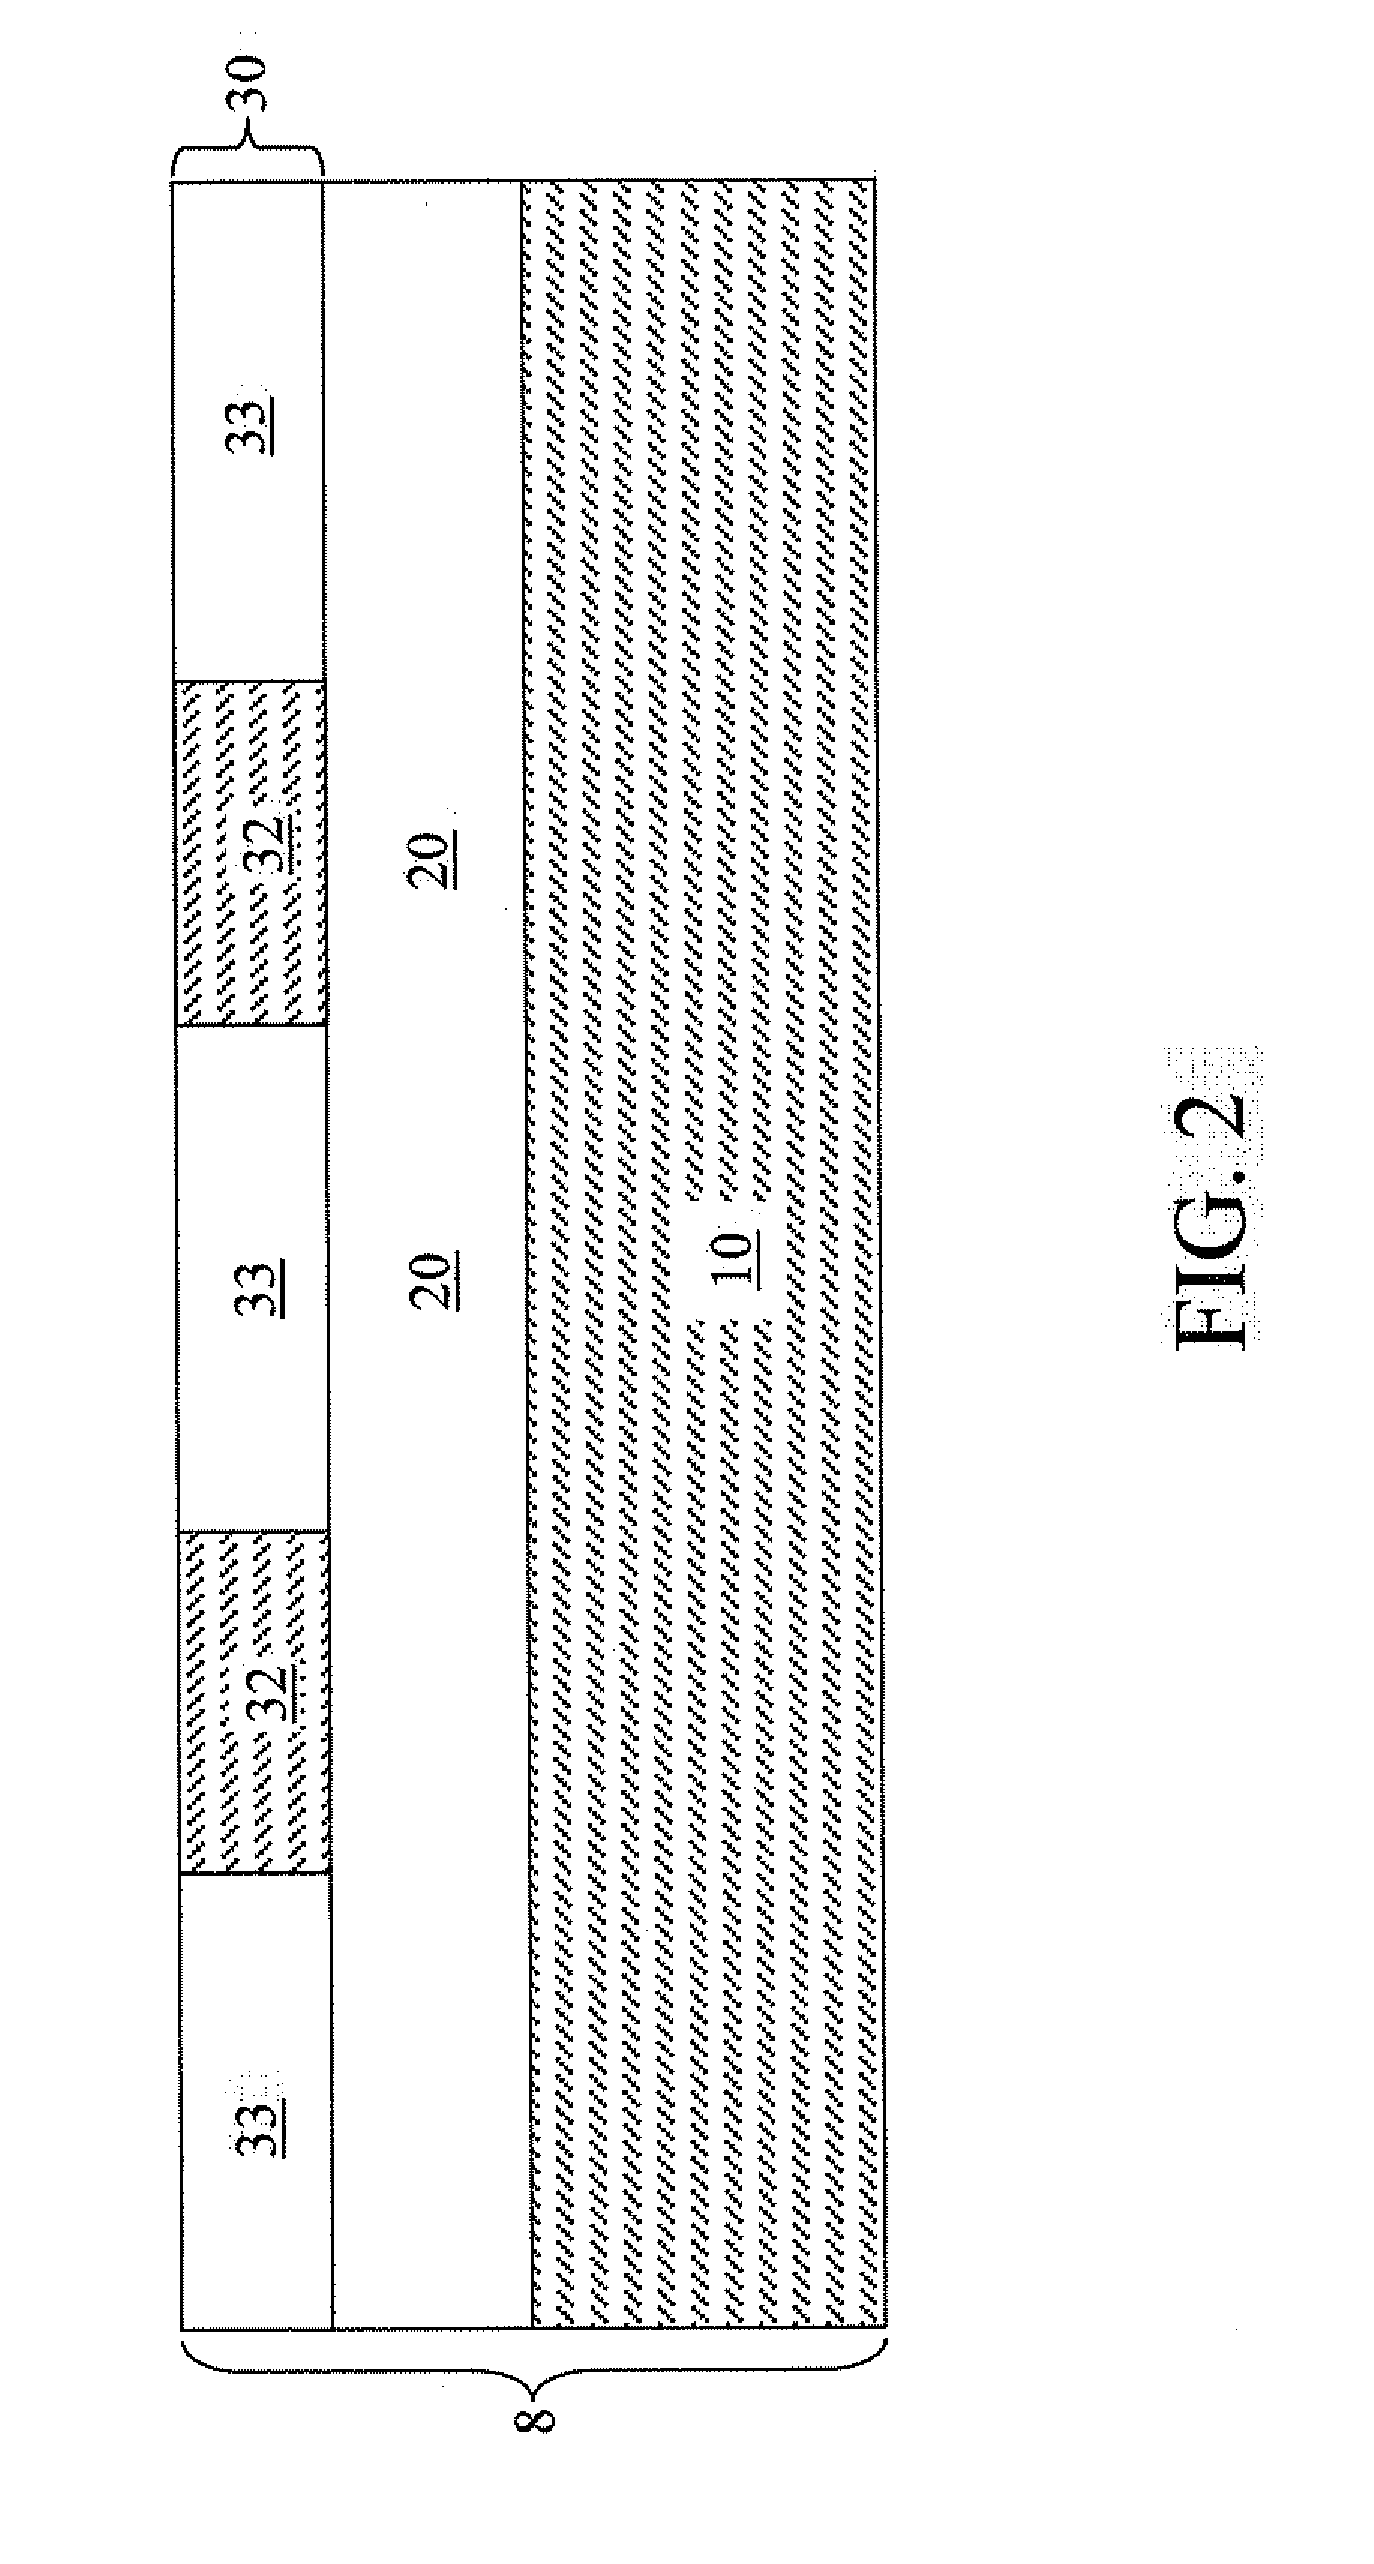 Soi radio frequency switch with enhanced signal fidelity and electrical isolation